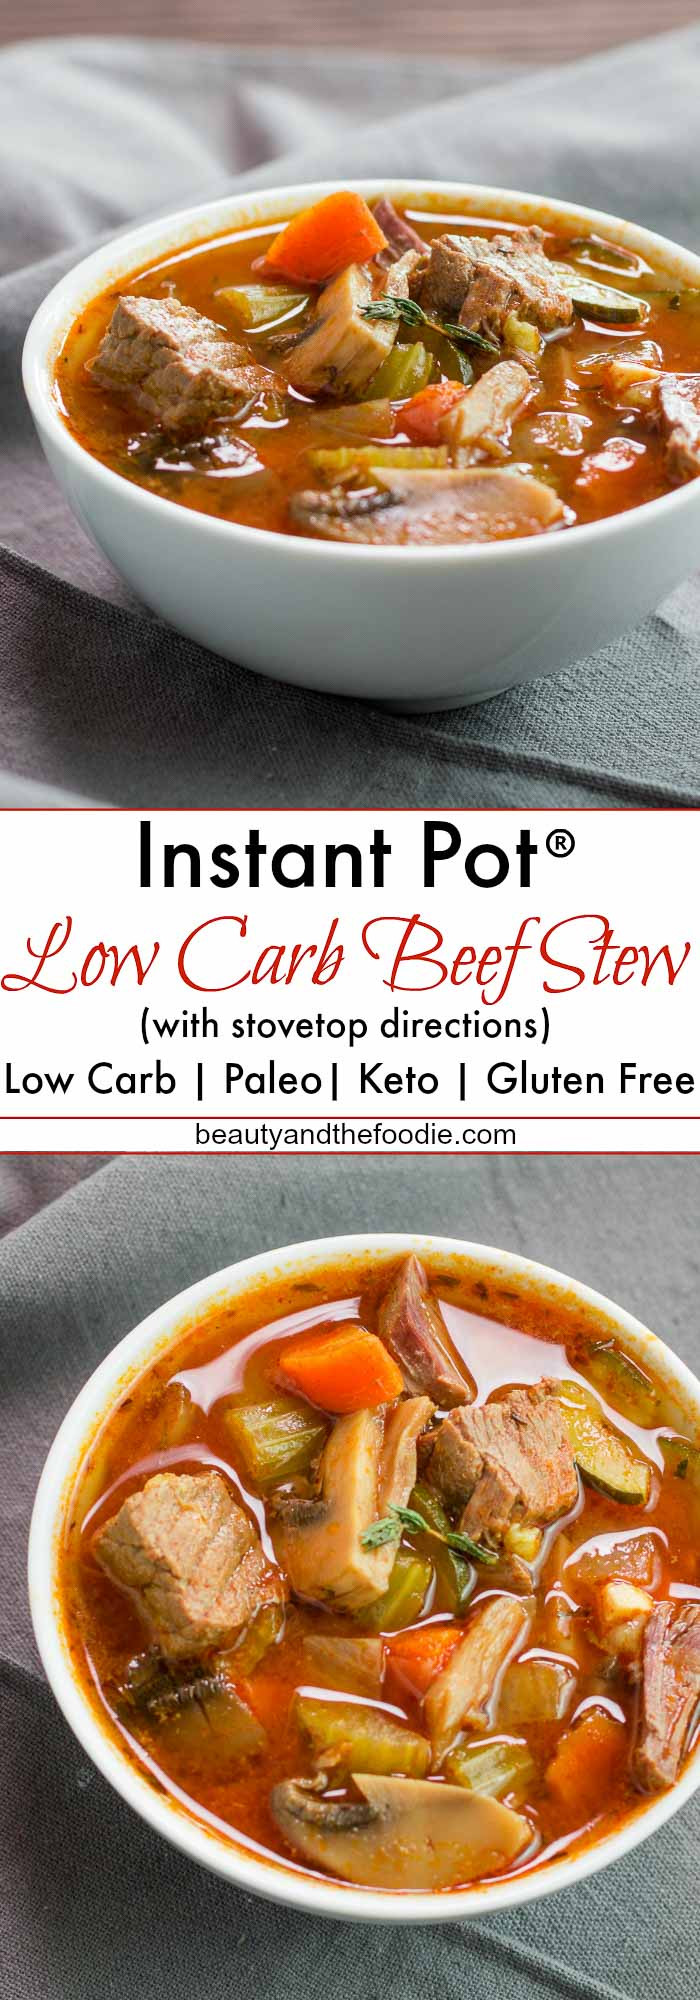 Low Carb Crock Pot Beef Stew
 Low Carb Instant Pot or Stovetop Hearty Beef Stew